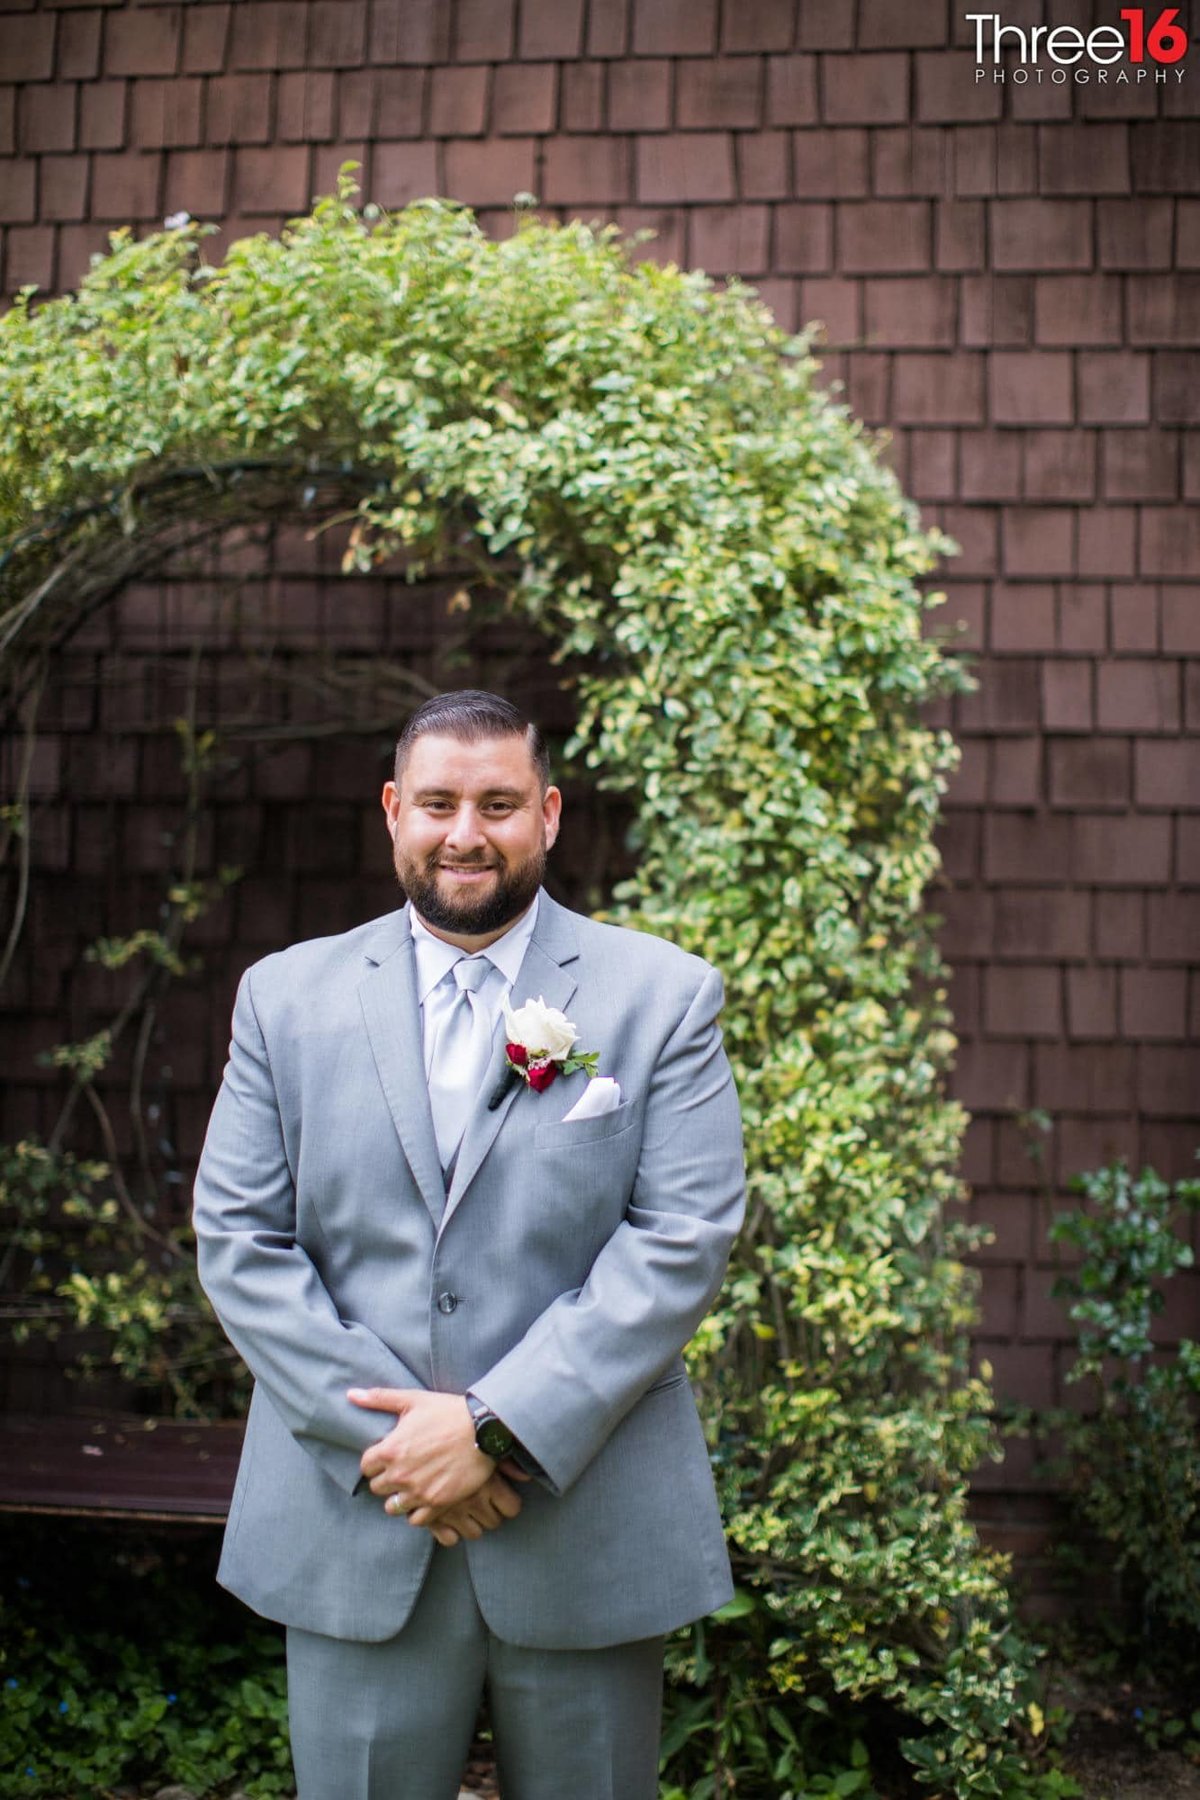 Groom poses for photos in his gray suit